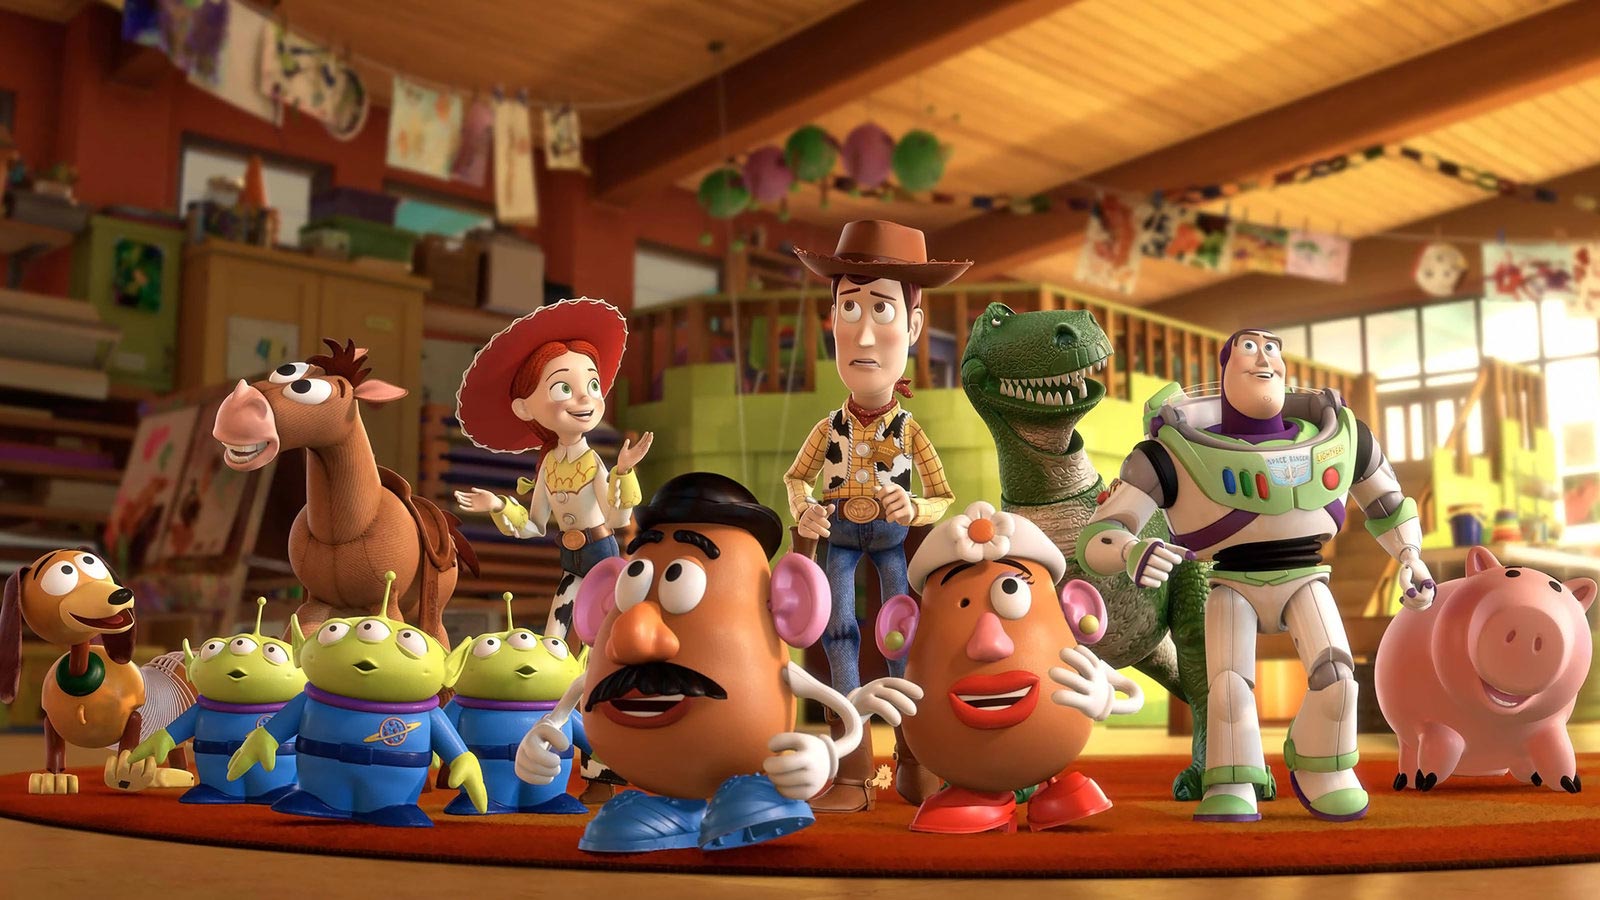 Only a True Pixar Fan Has Watched 18/21 of These Movies Toy Story 3 (2010)